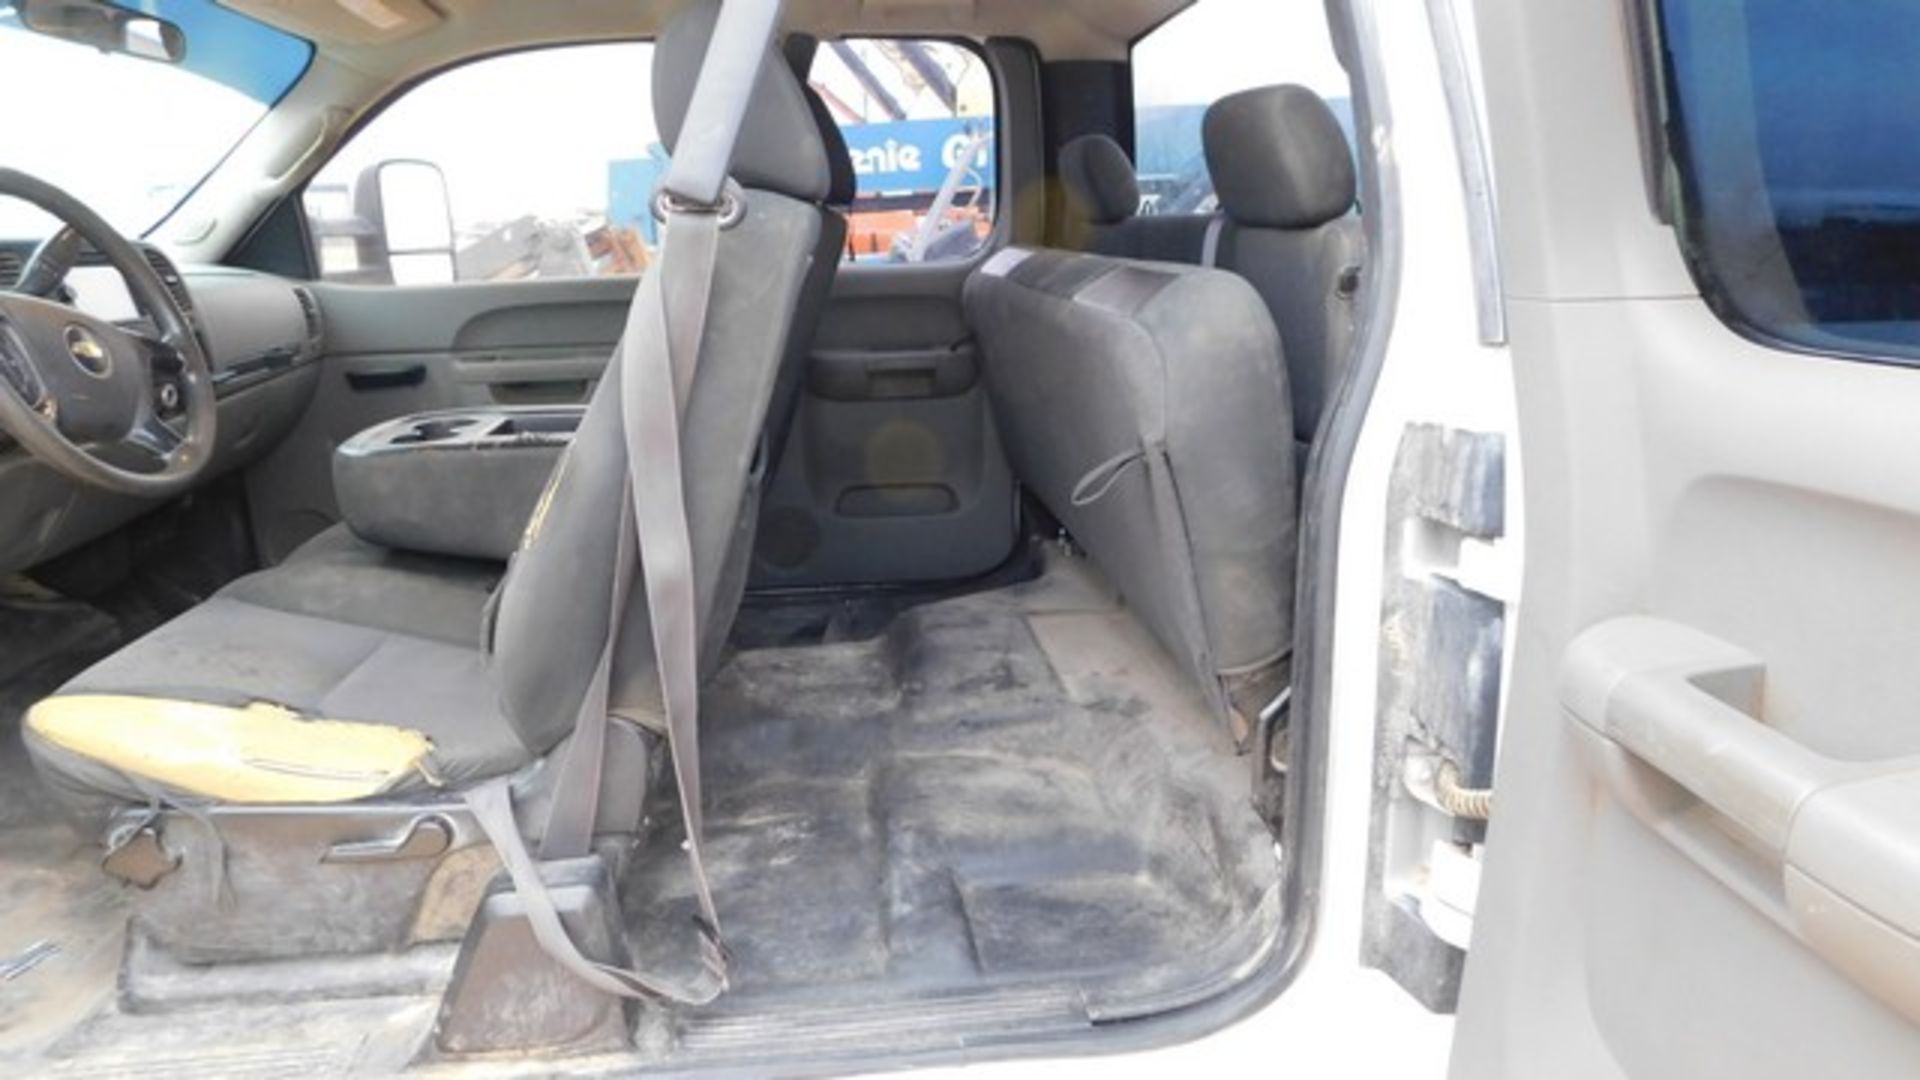 Located in YARD 1 - Midland, TX (X) 2013 CHEVROLET 2500 HD EXT CAB PICK UP, P/B - Image 8 of 9